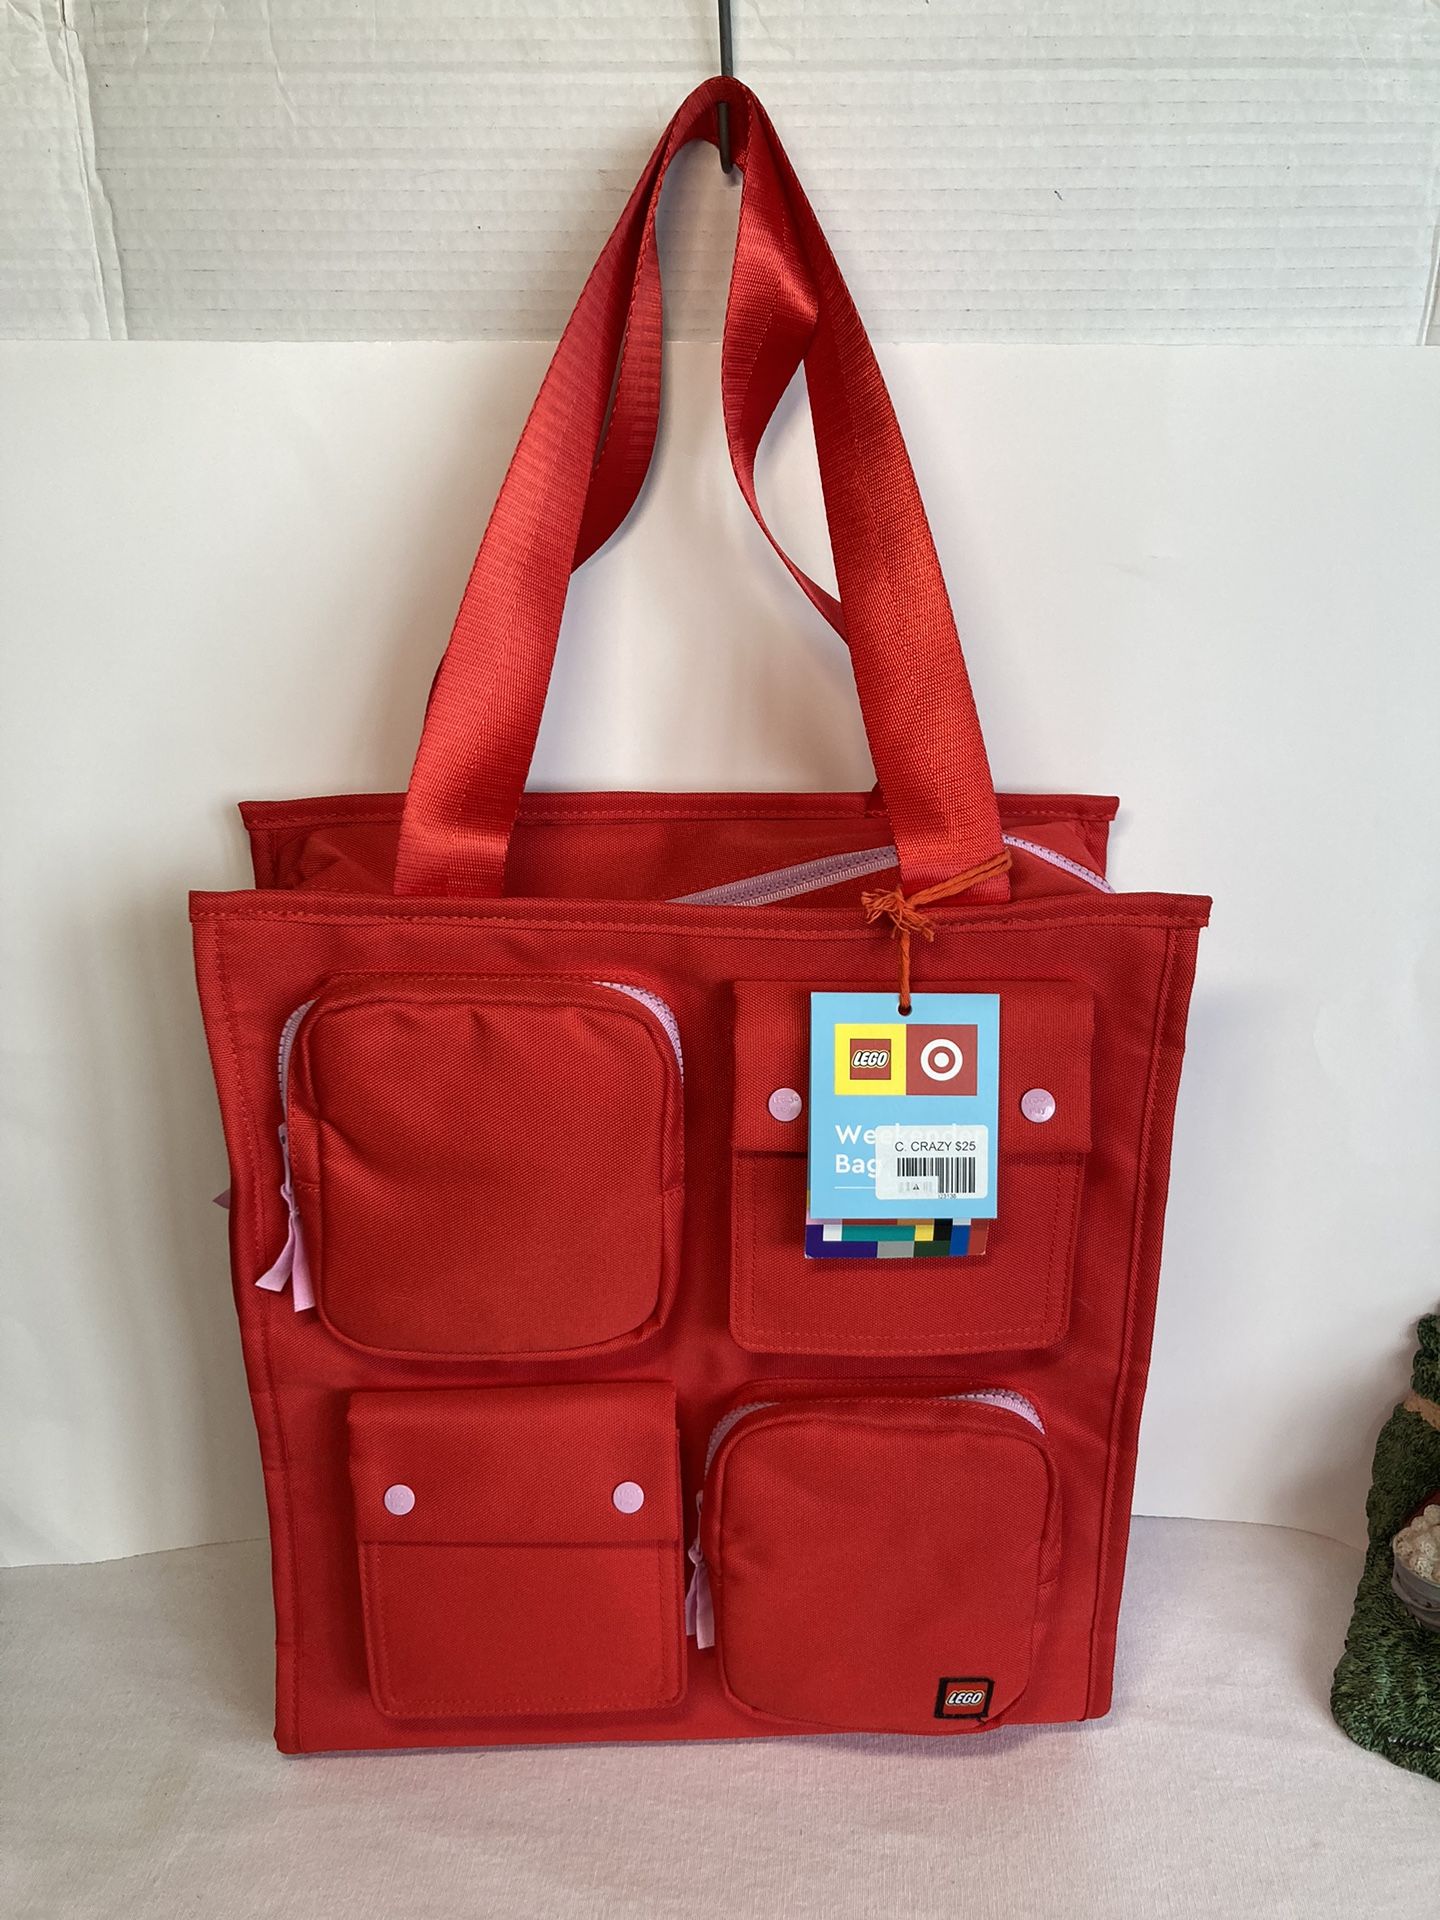 LEGO Collection x Target Weekender Tote Bag Utility Bag RED New With Tags